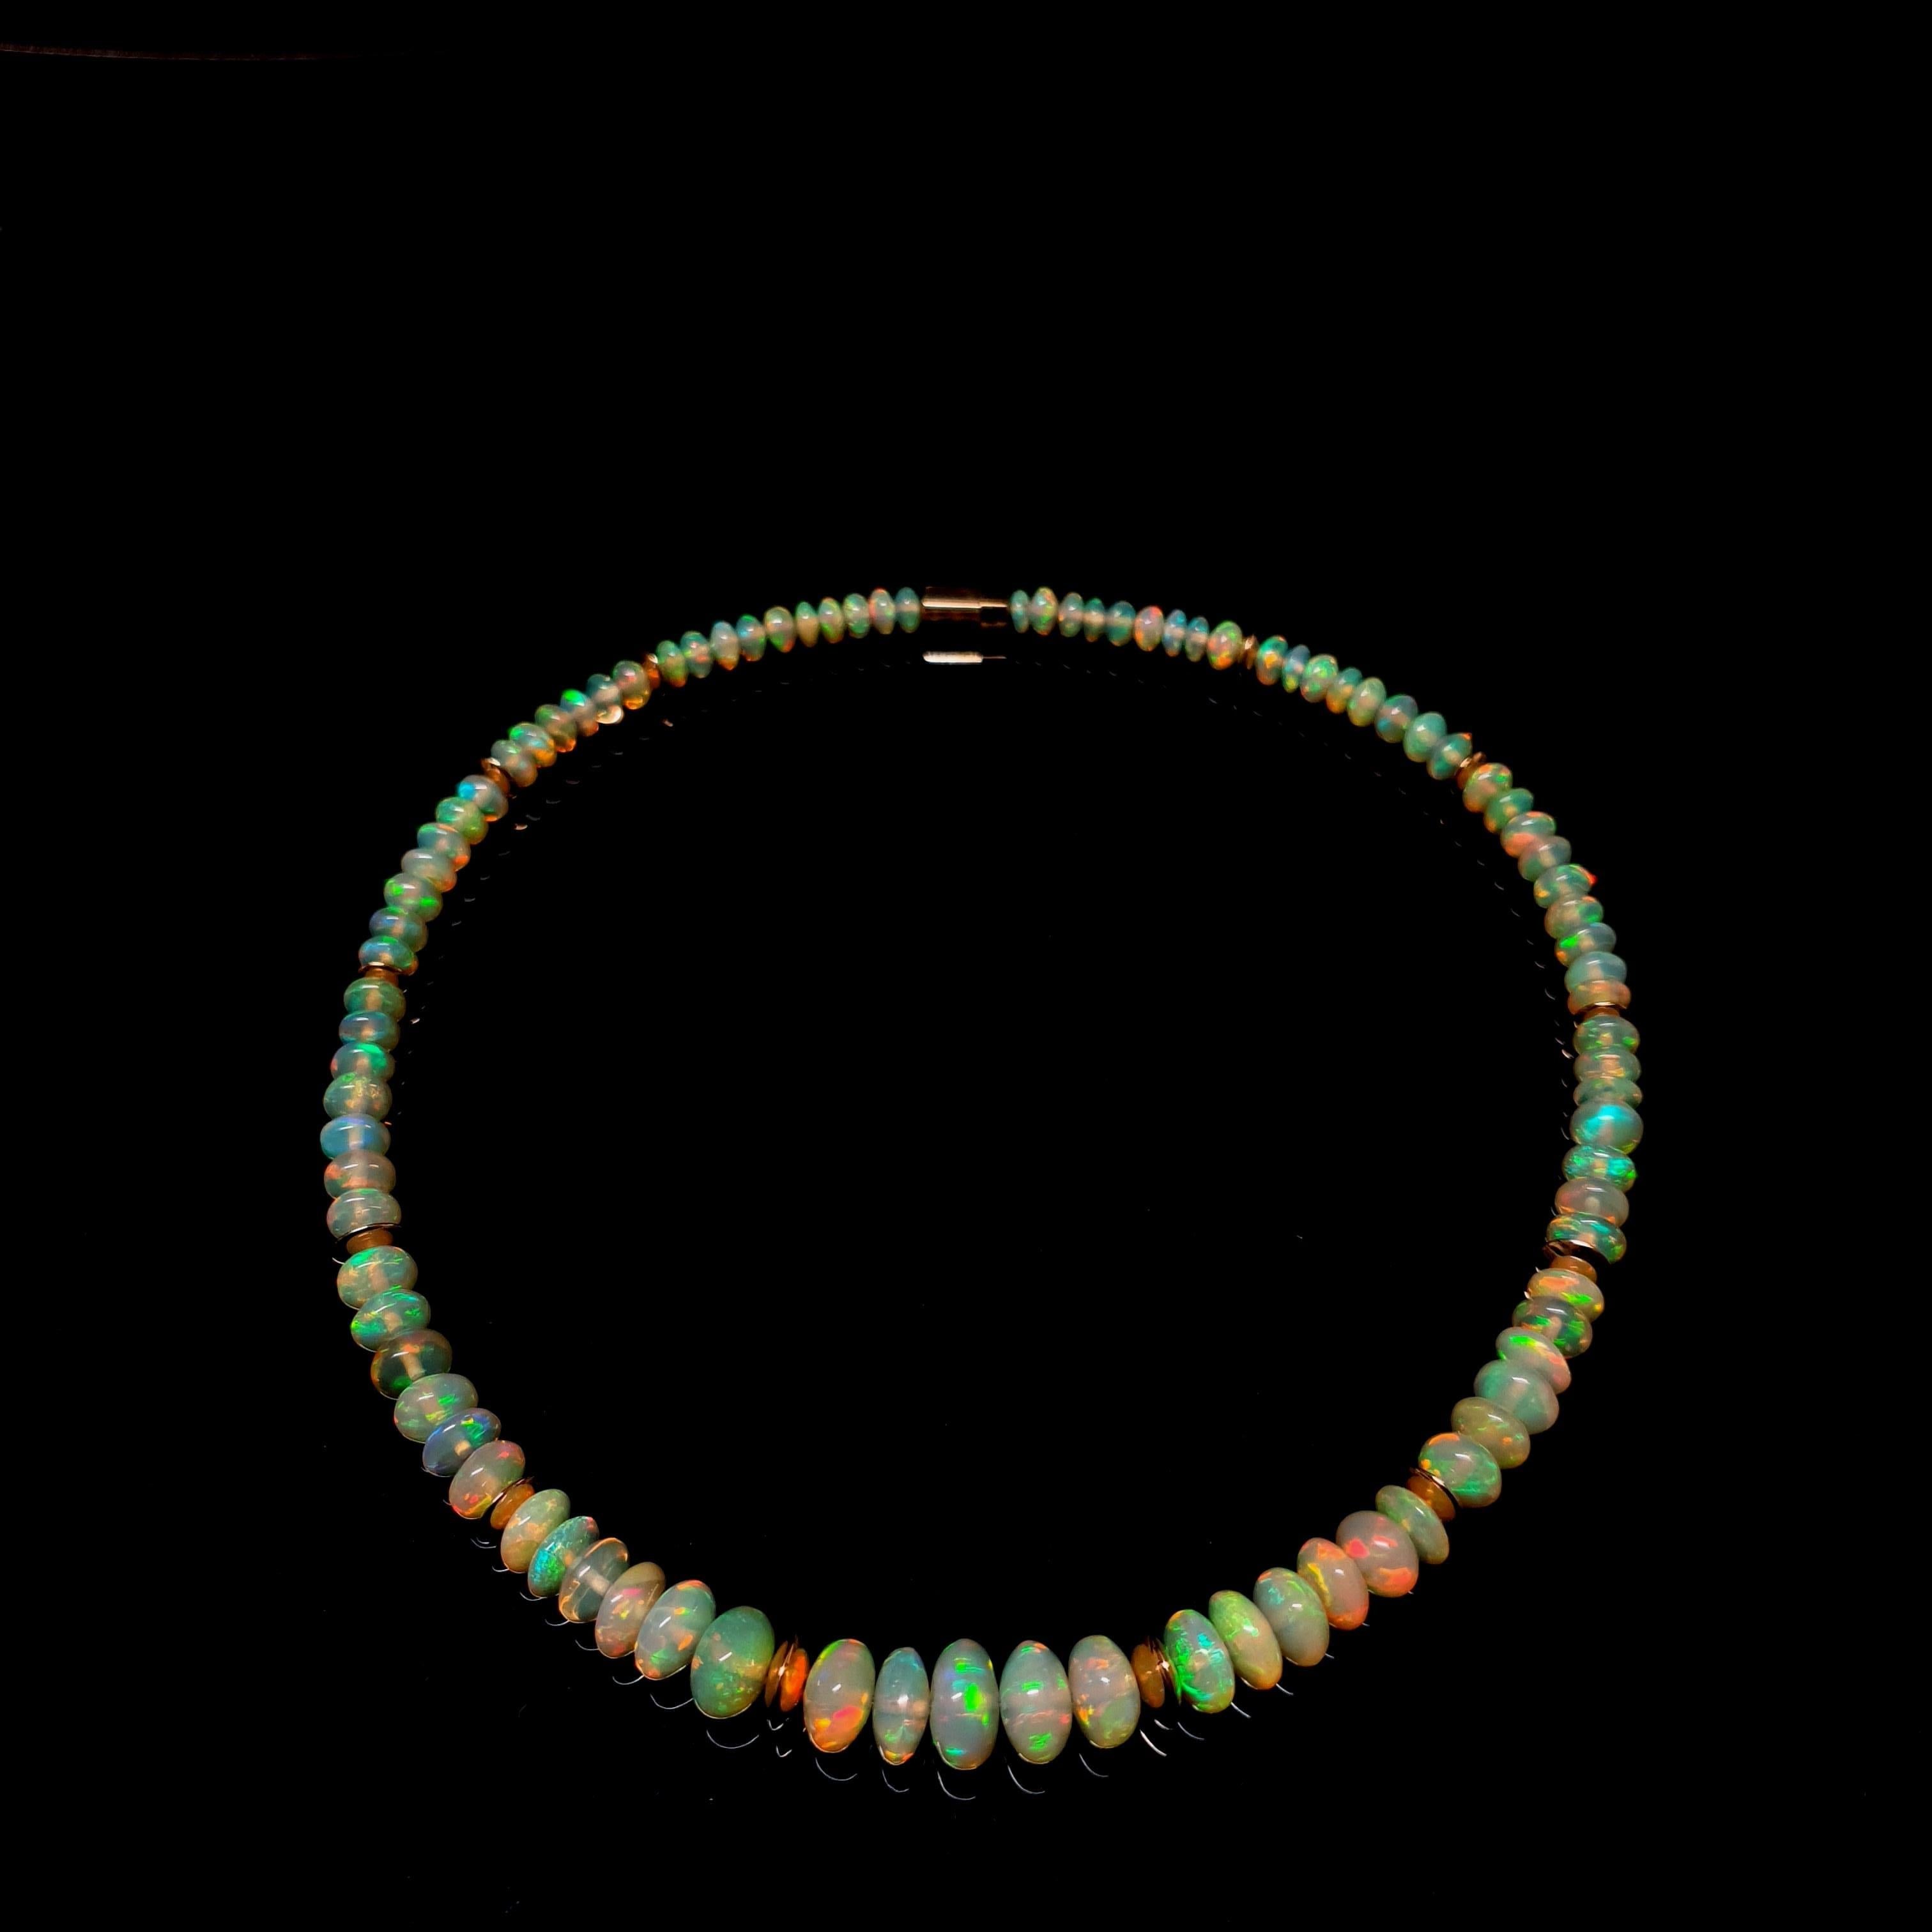 Crispy Sparkling Opal Rondel Beaded Necklace with 18 Carat Rose Gold, Greenish For Sale 2